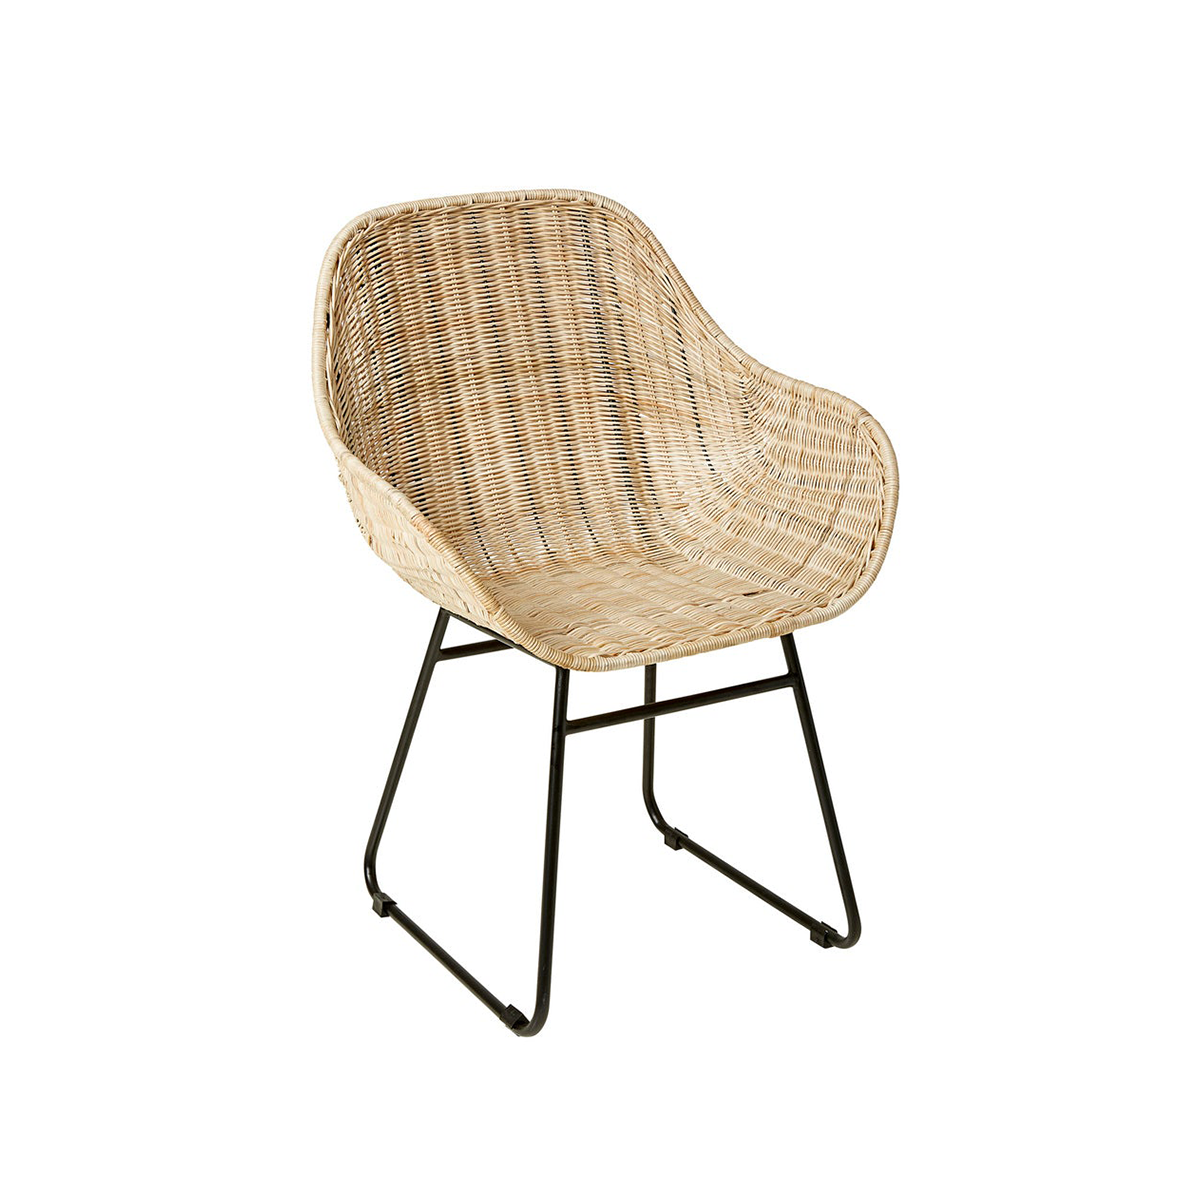 FondHouse Ronoa Rattan Dining Chair Natural